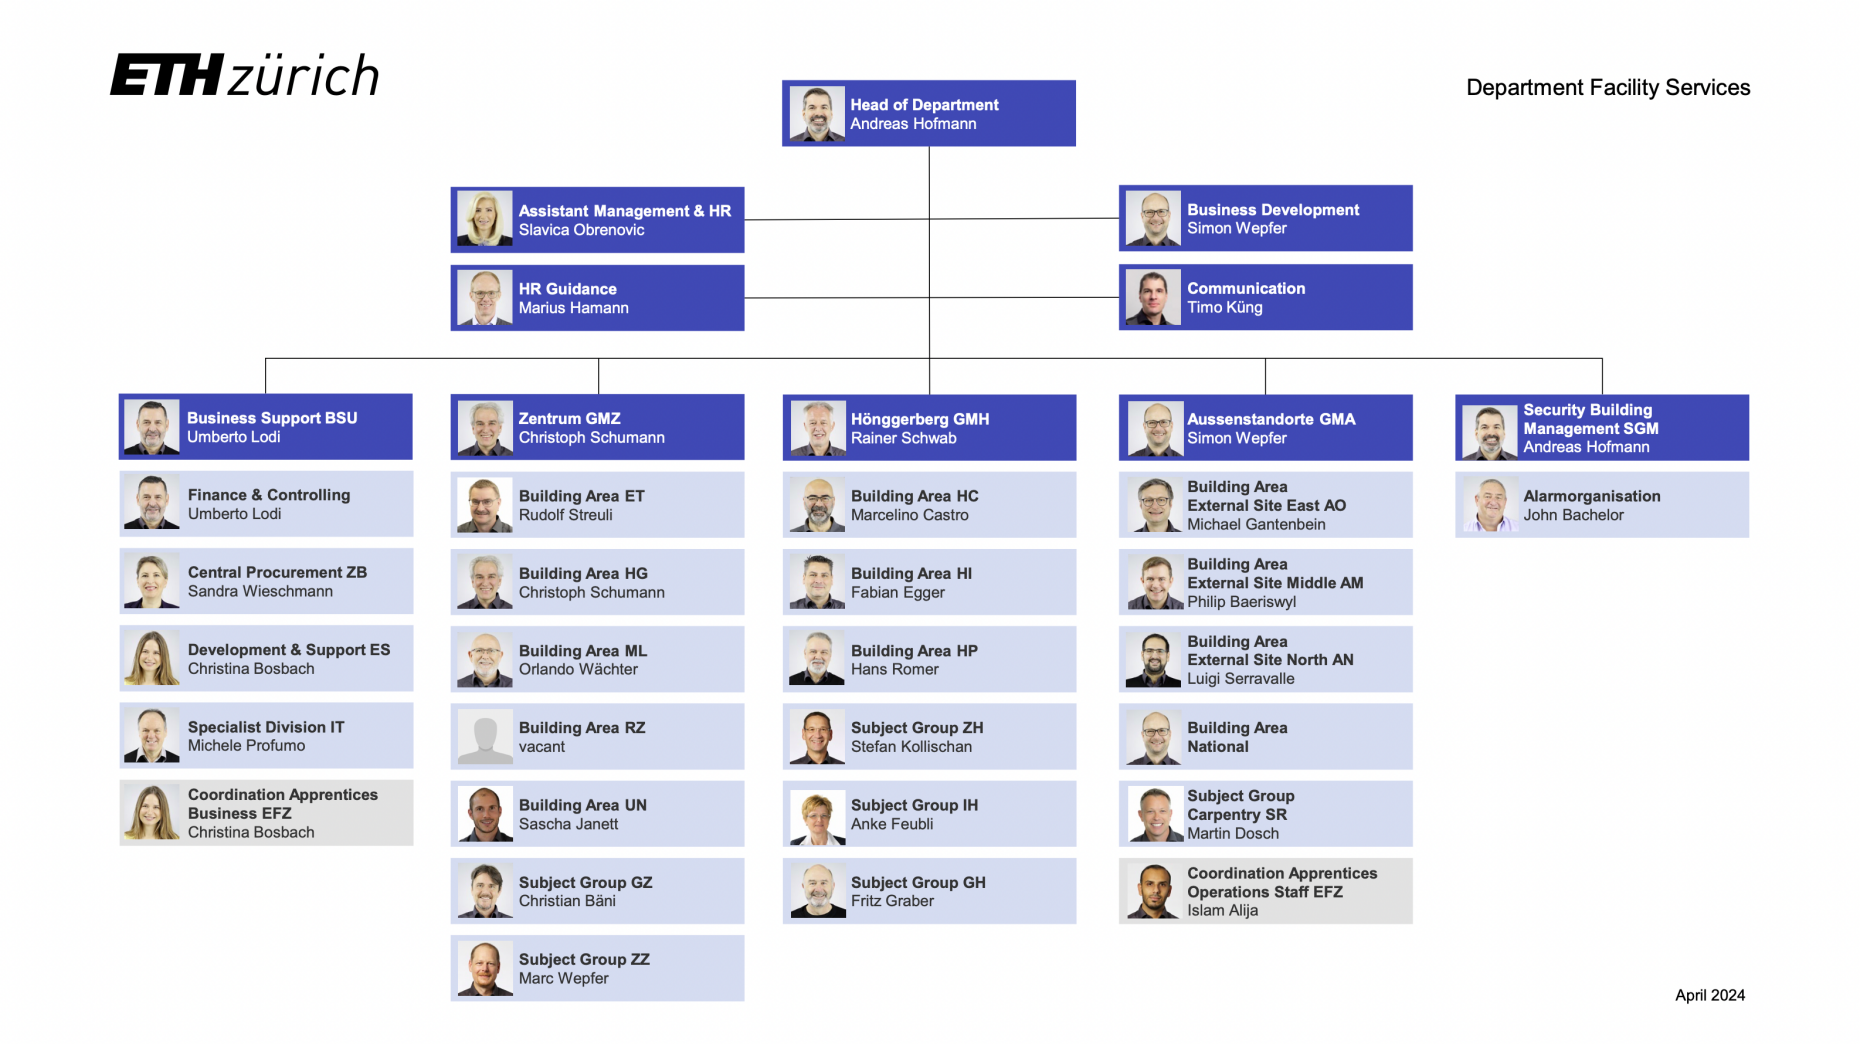 Enlarged view: Organisation chart Facility Services department